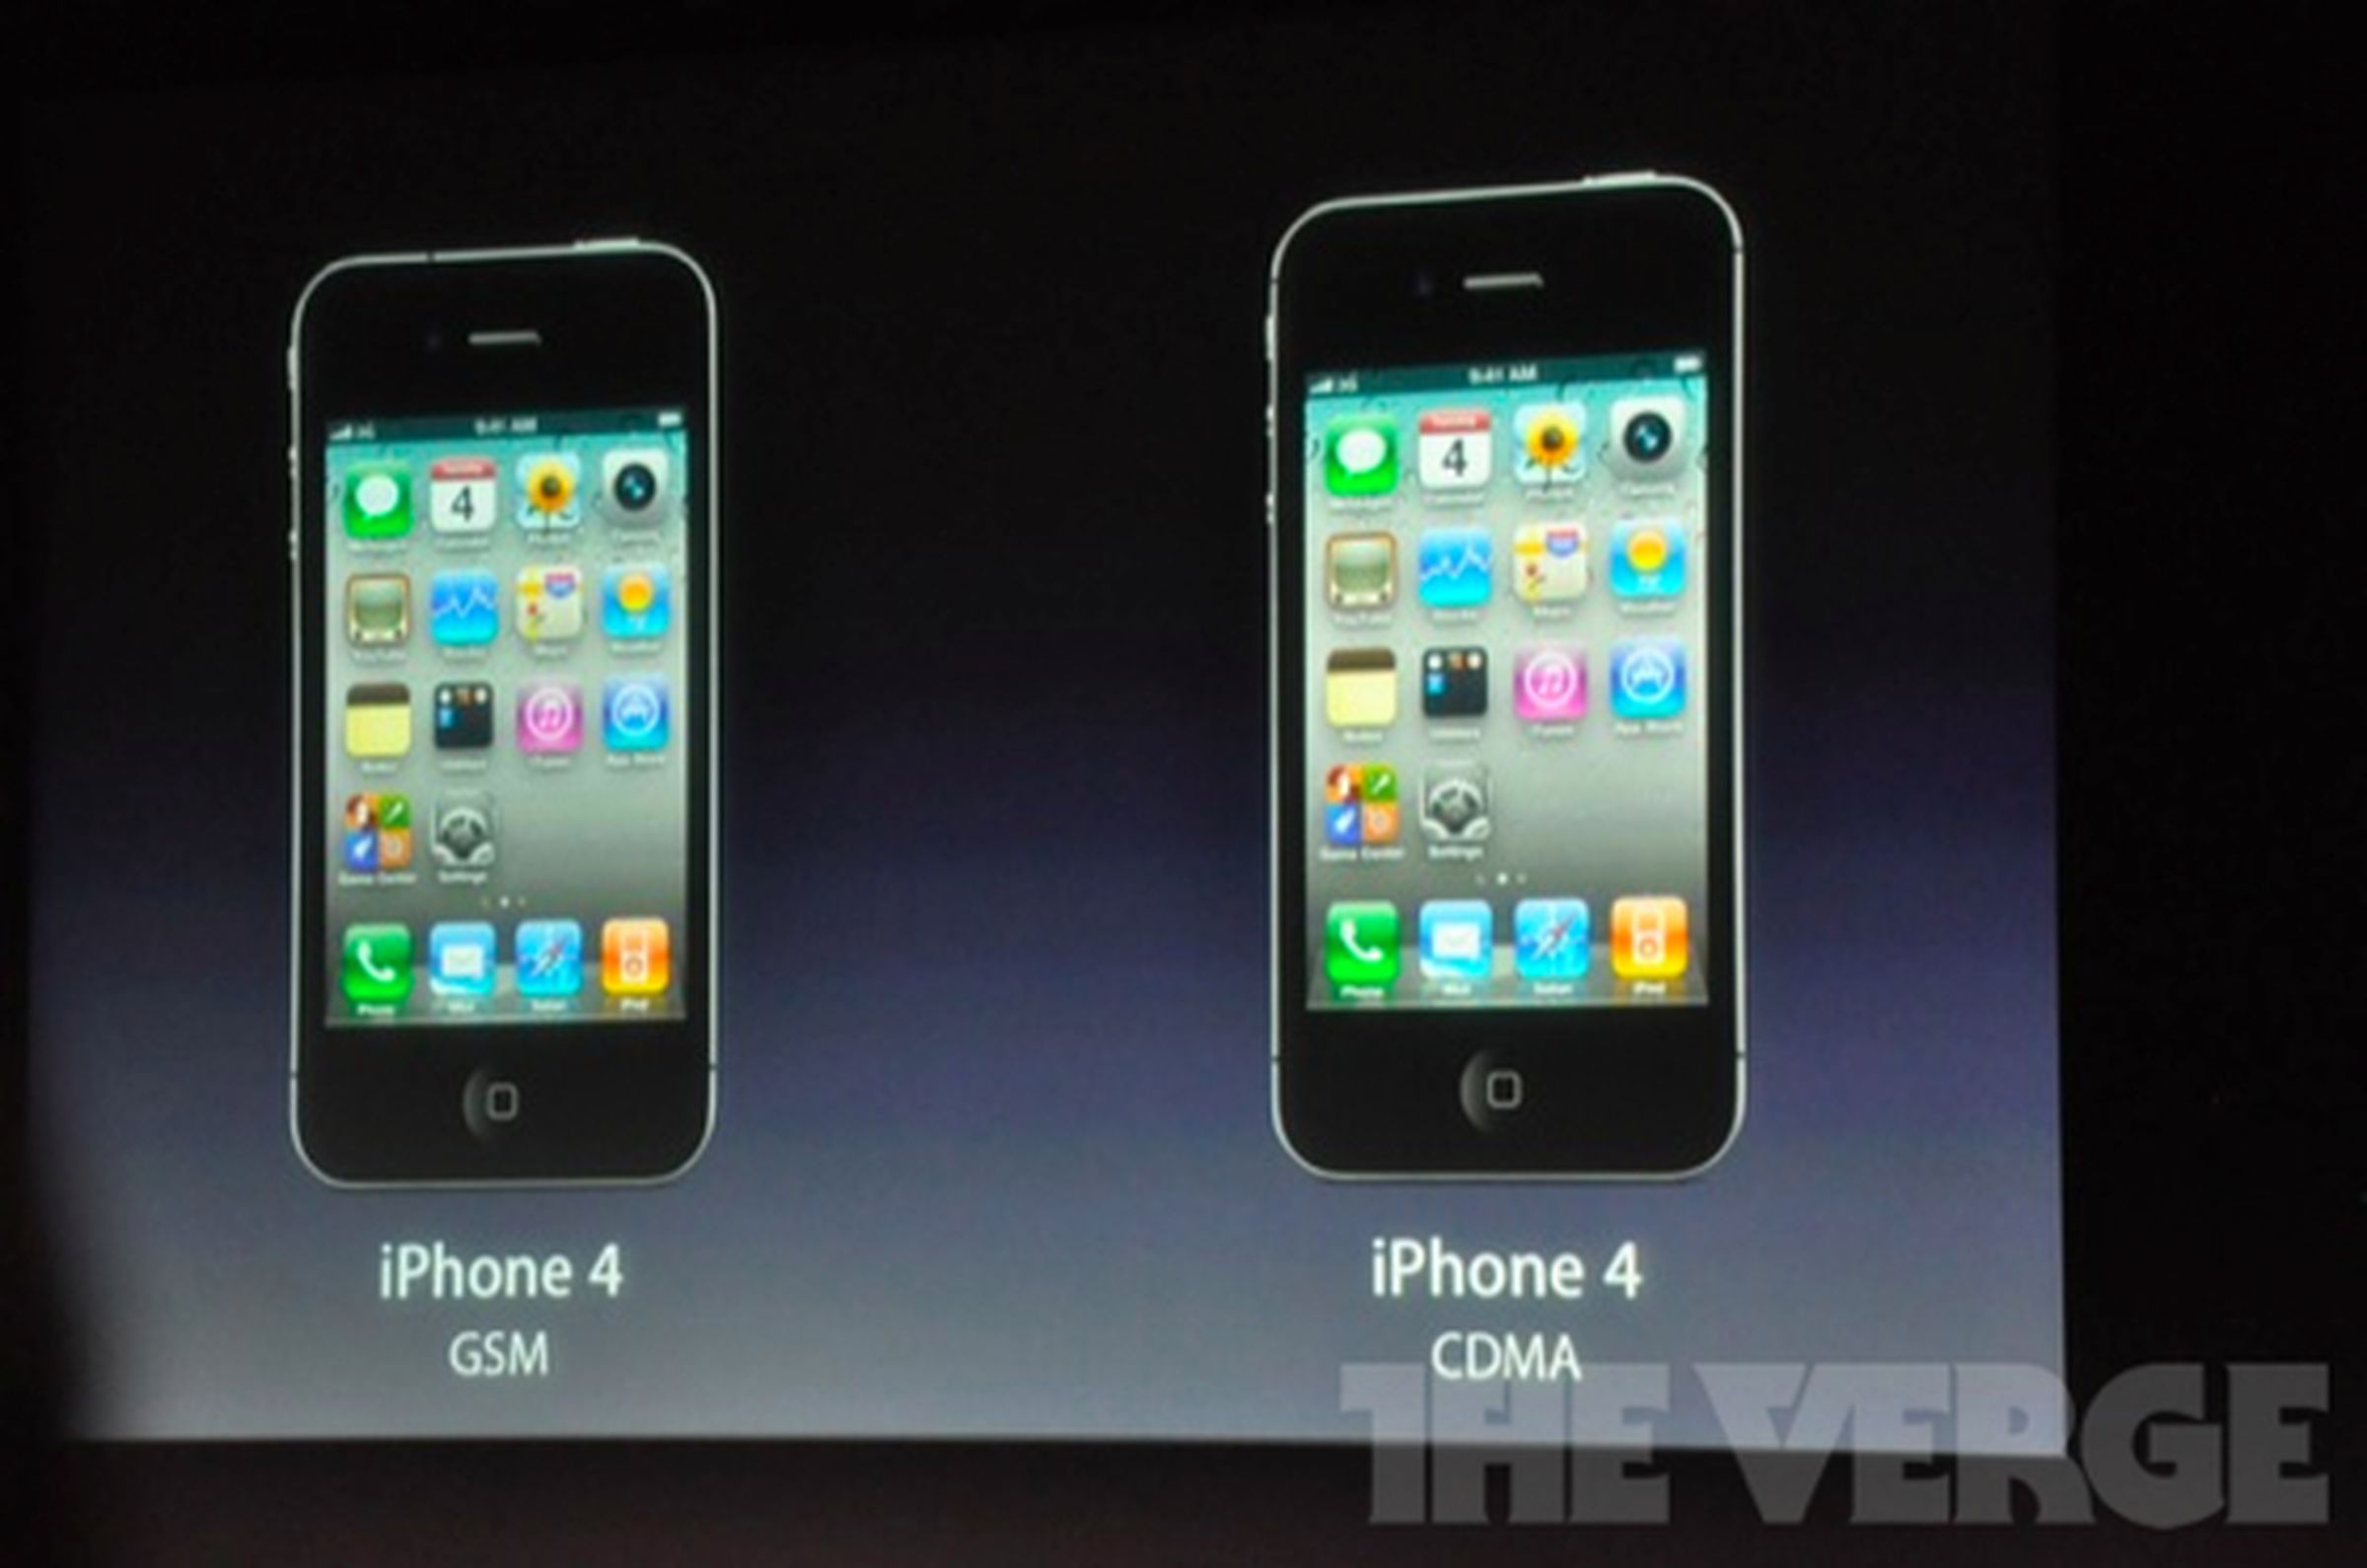 iPhone 4S announced, available October 14th starting at $199